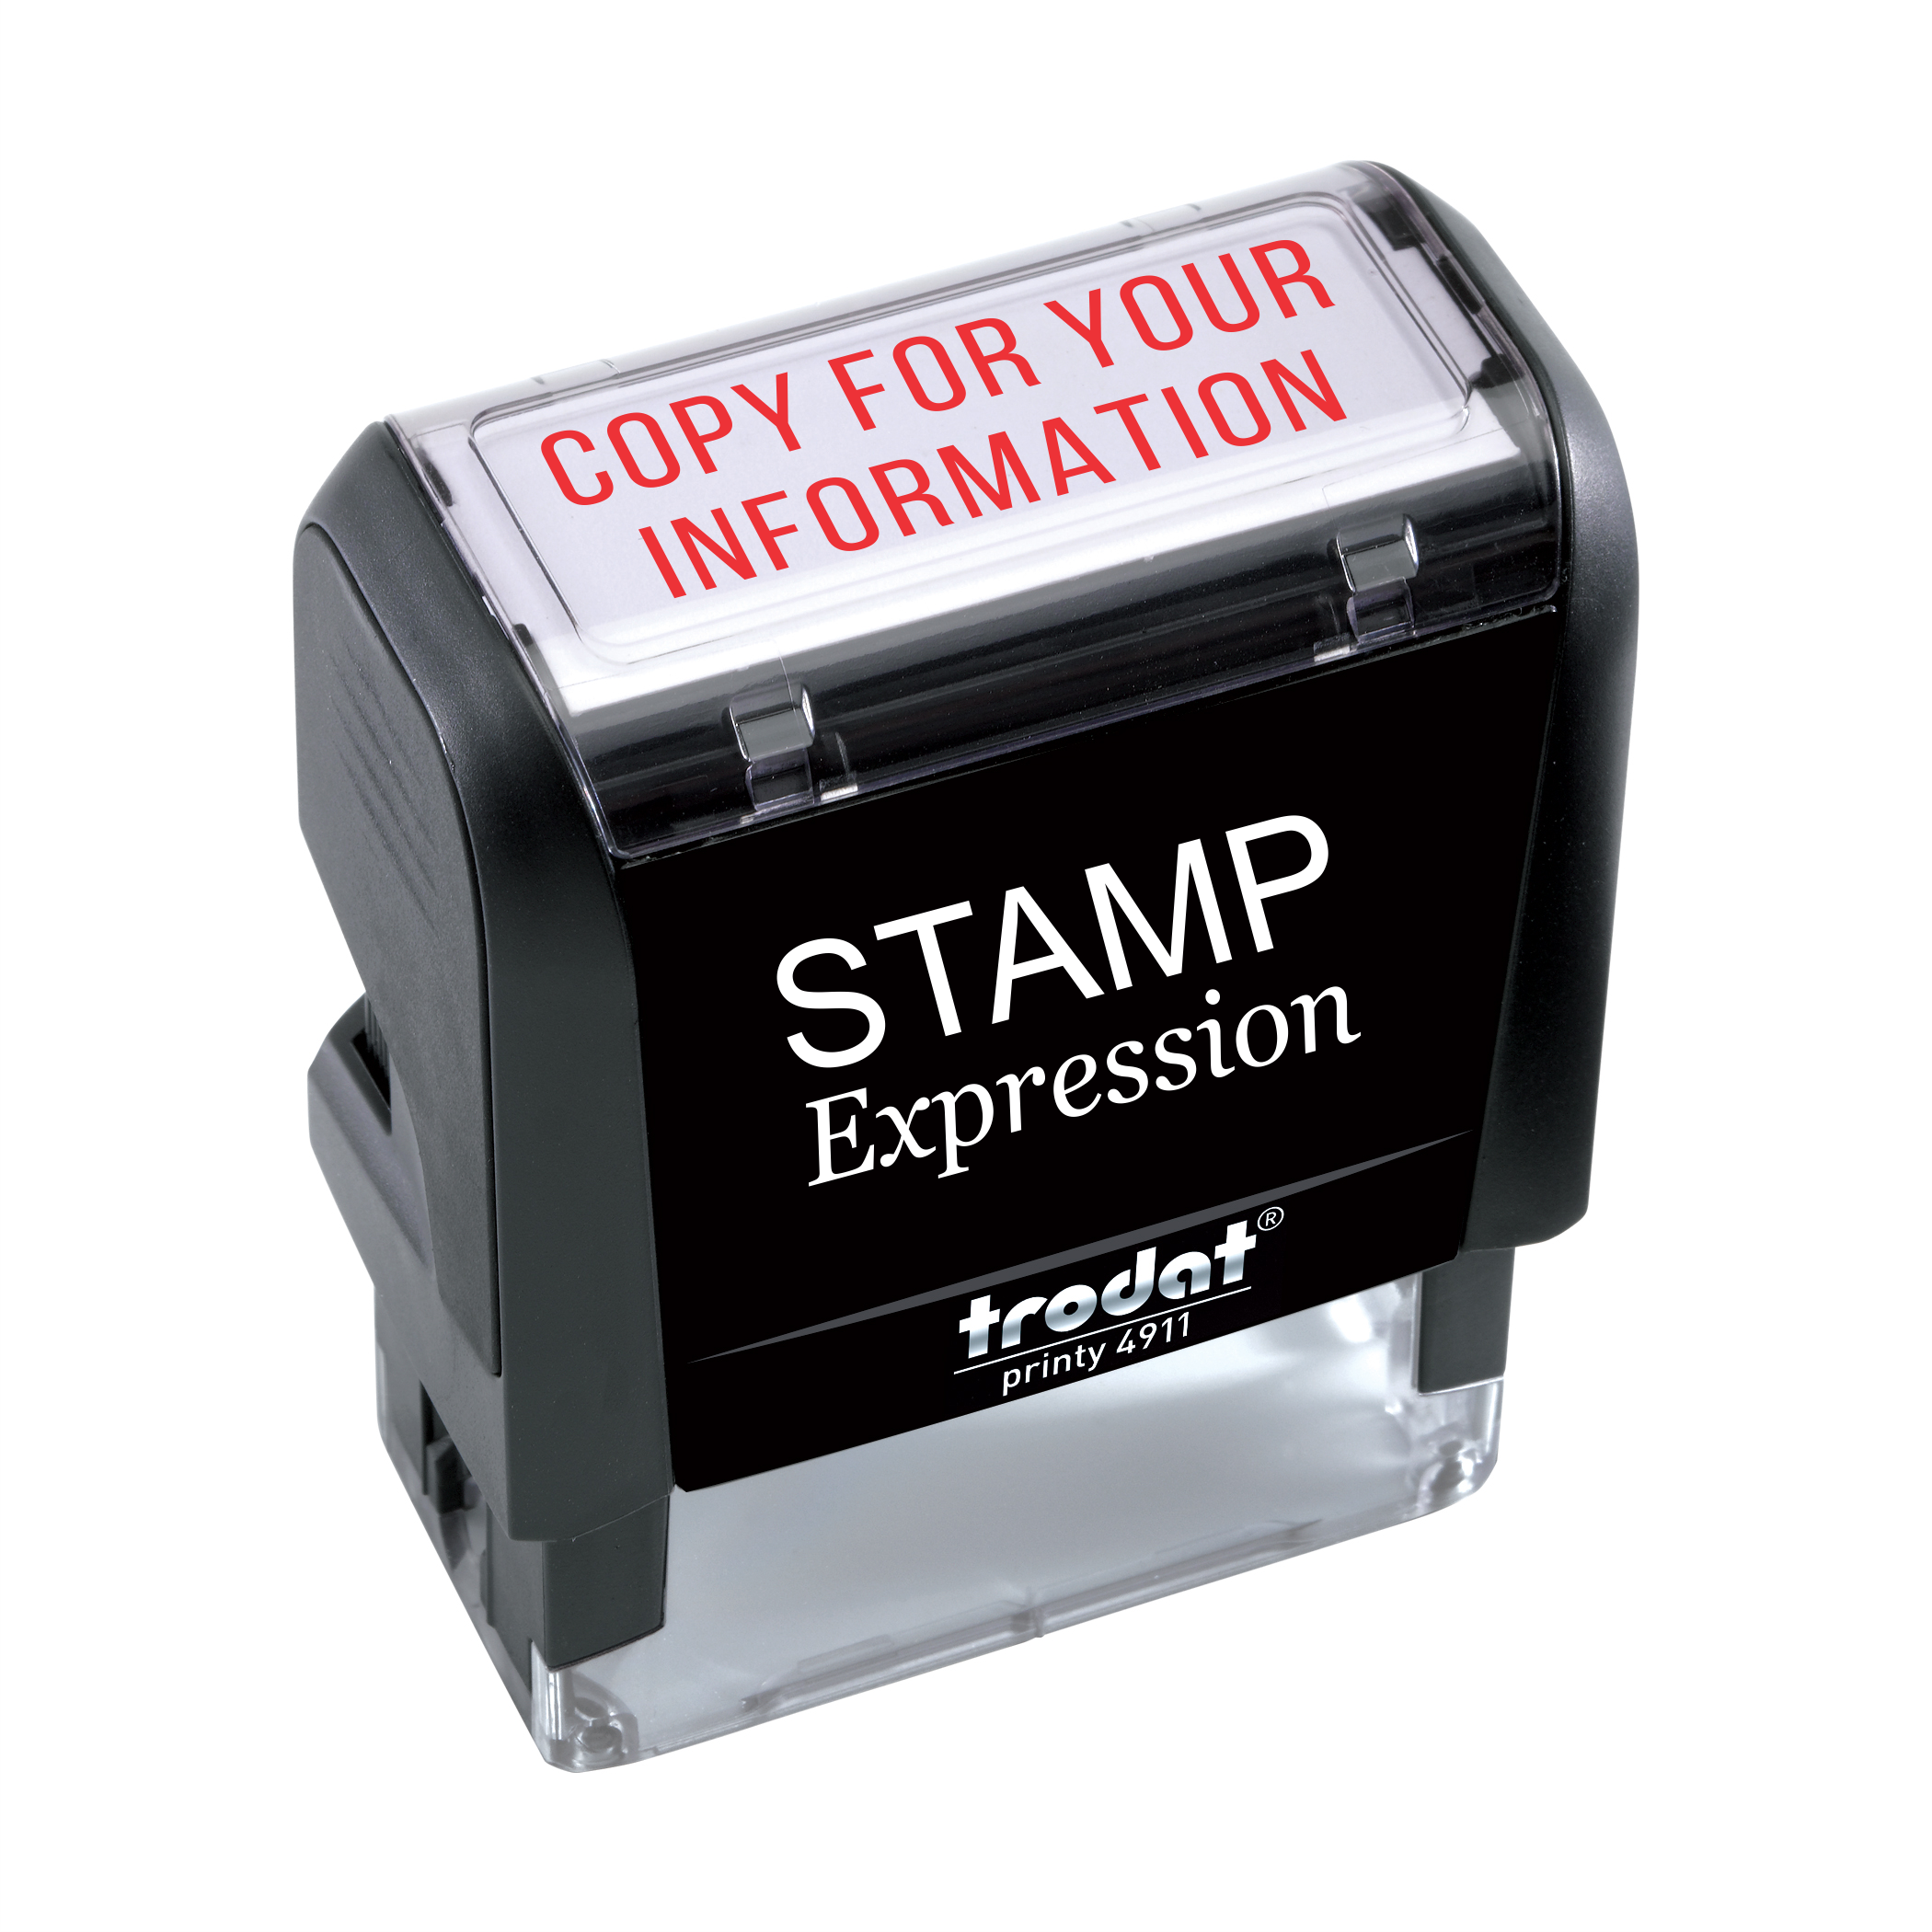 Copy for Your Information Office Self Inking Rubber Stamp